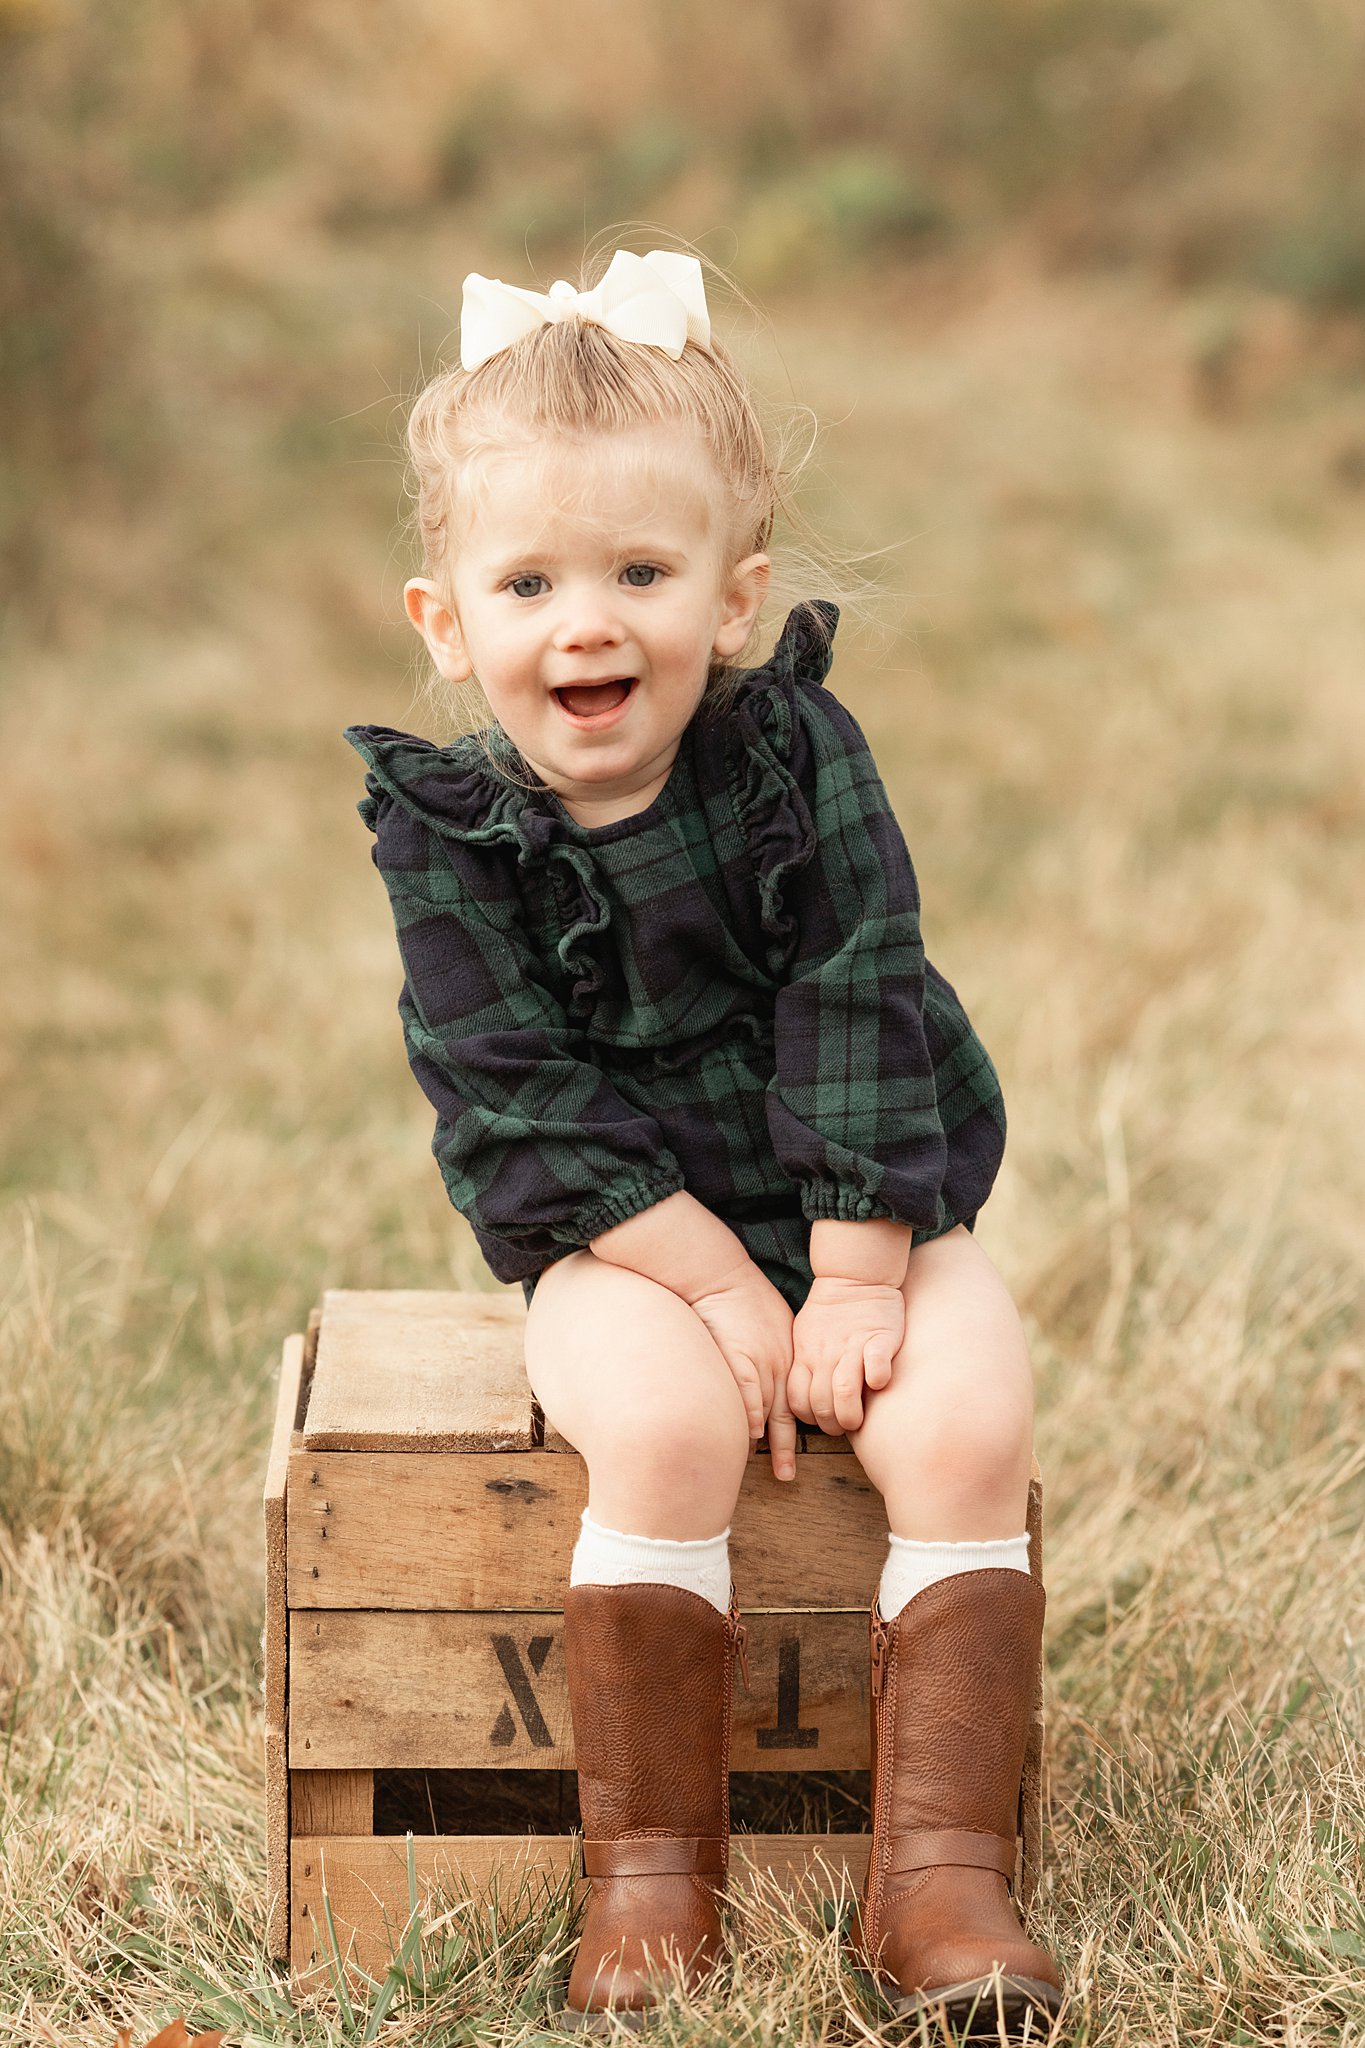 A young girl in a green plaid dress sits on a wooden box in a field after attending Pittsburgh Preschools